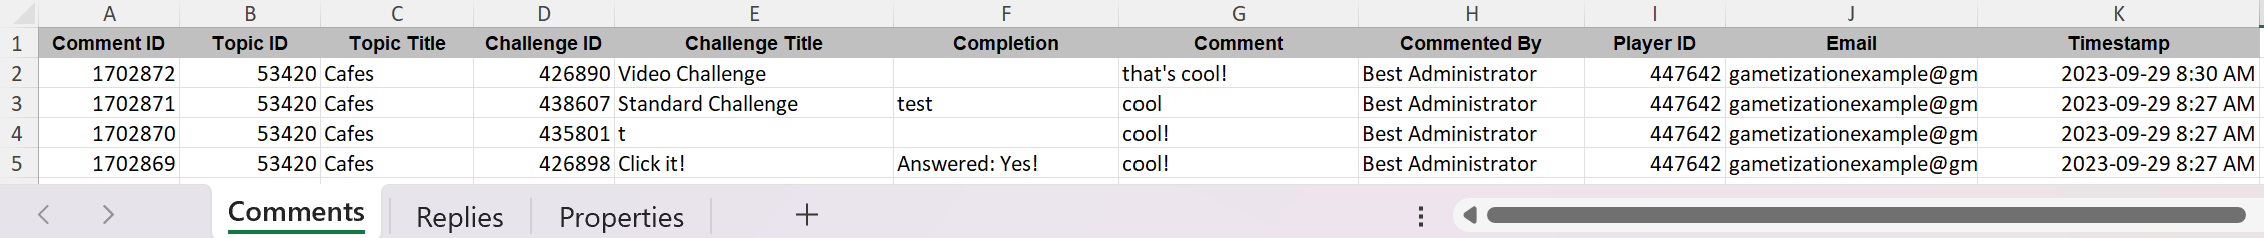 All Completion Comments in this Project.png